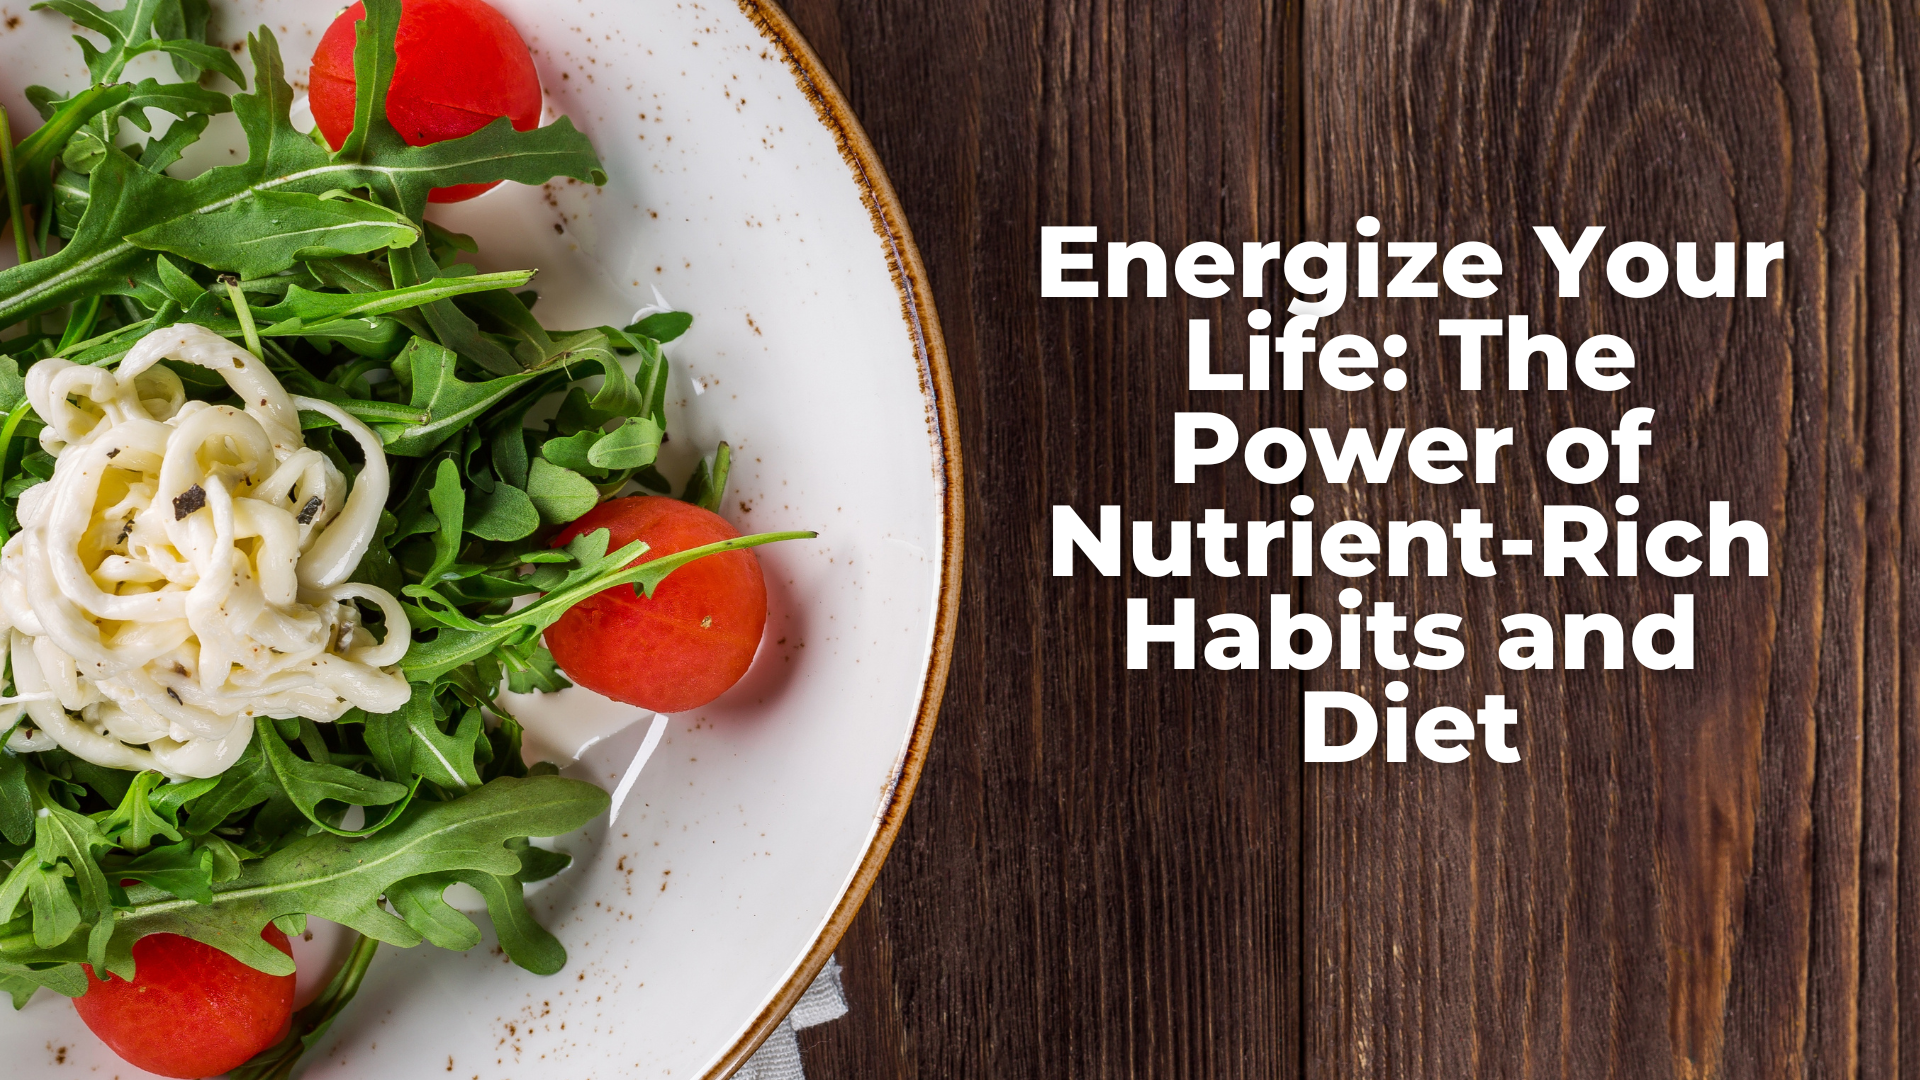 Energize Your Life: The Power of Nutrient-Rich Habits and Diet